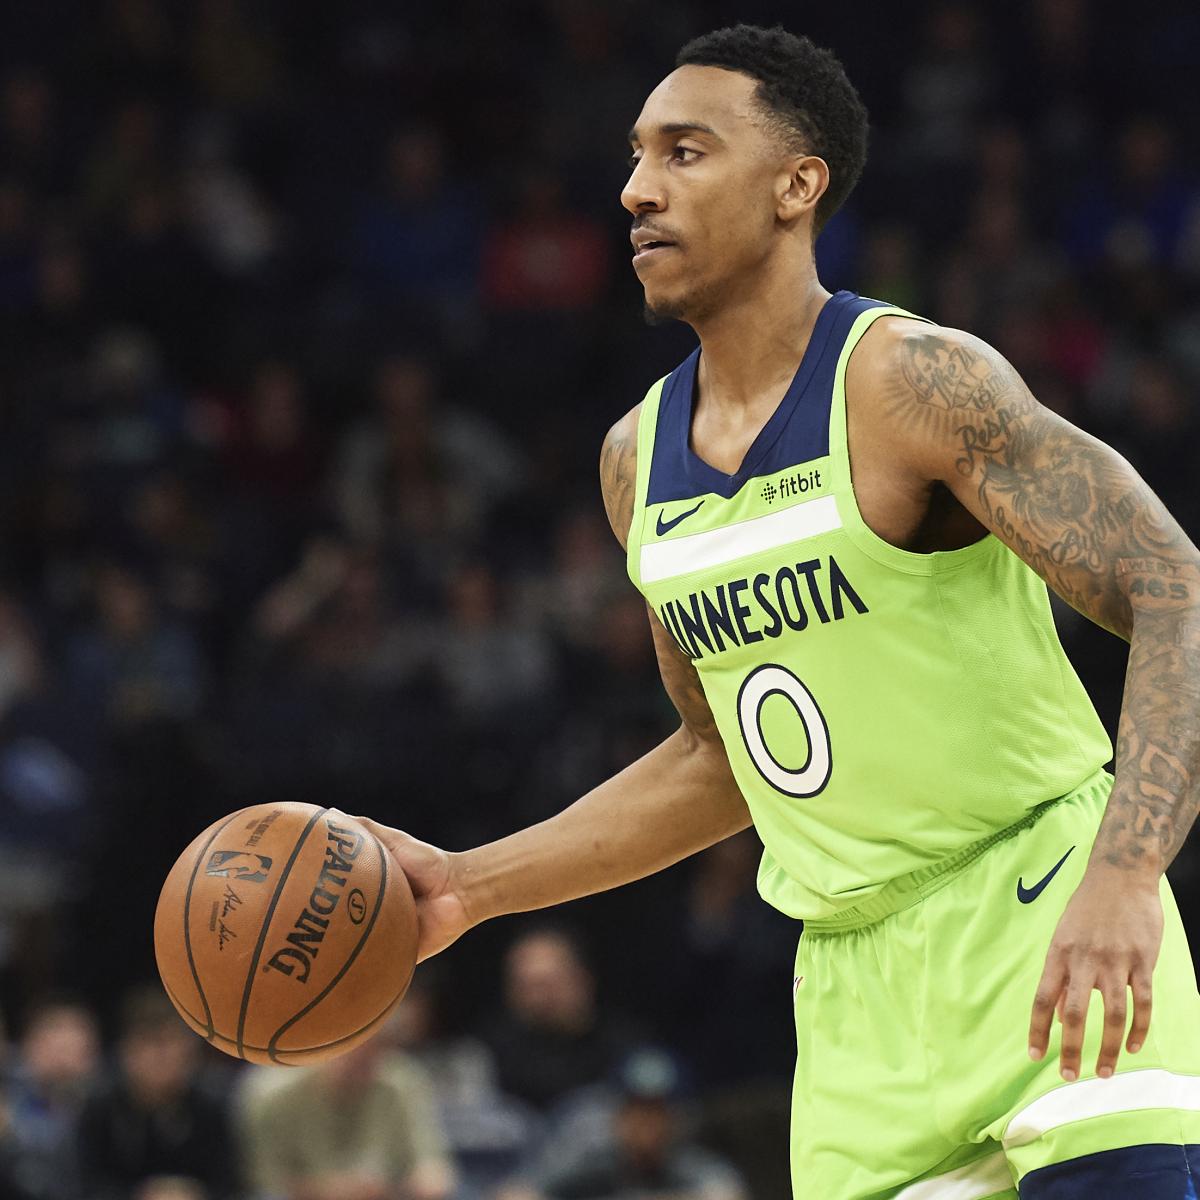 Quit flopping n***a, PLAY!” Jeff Teague recalls the time when he